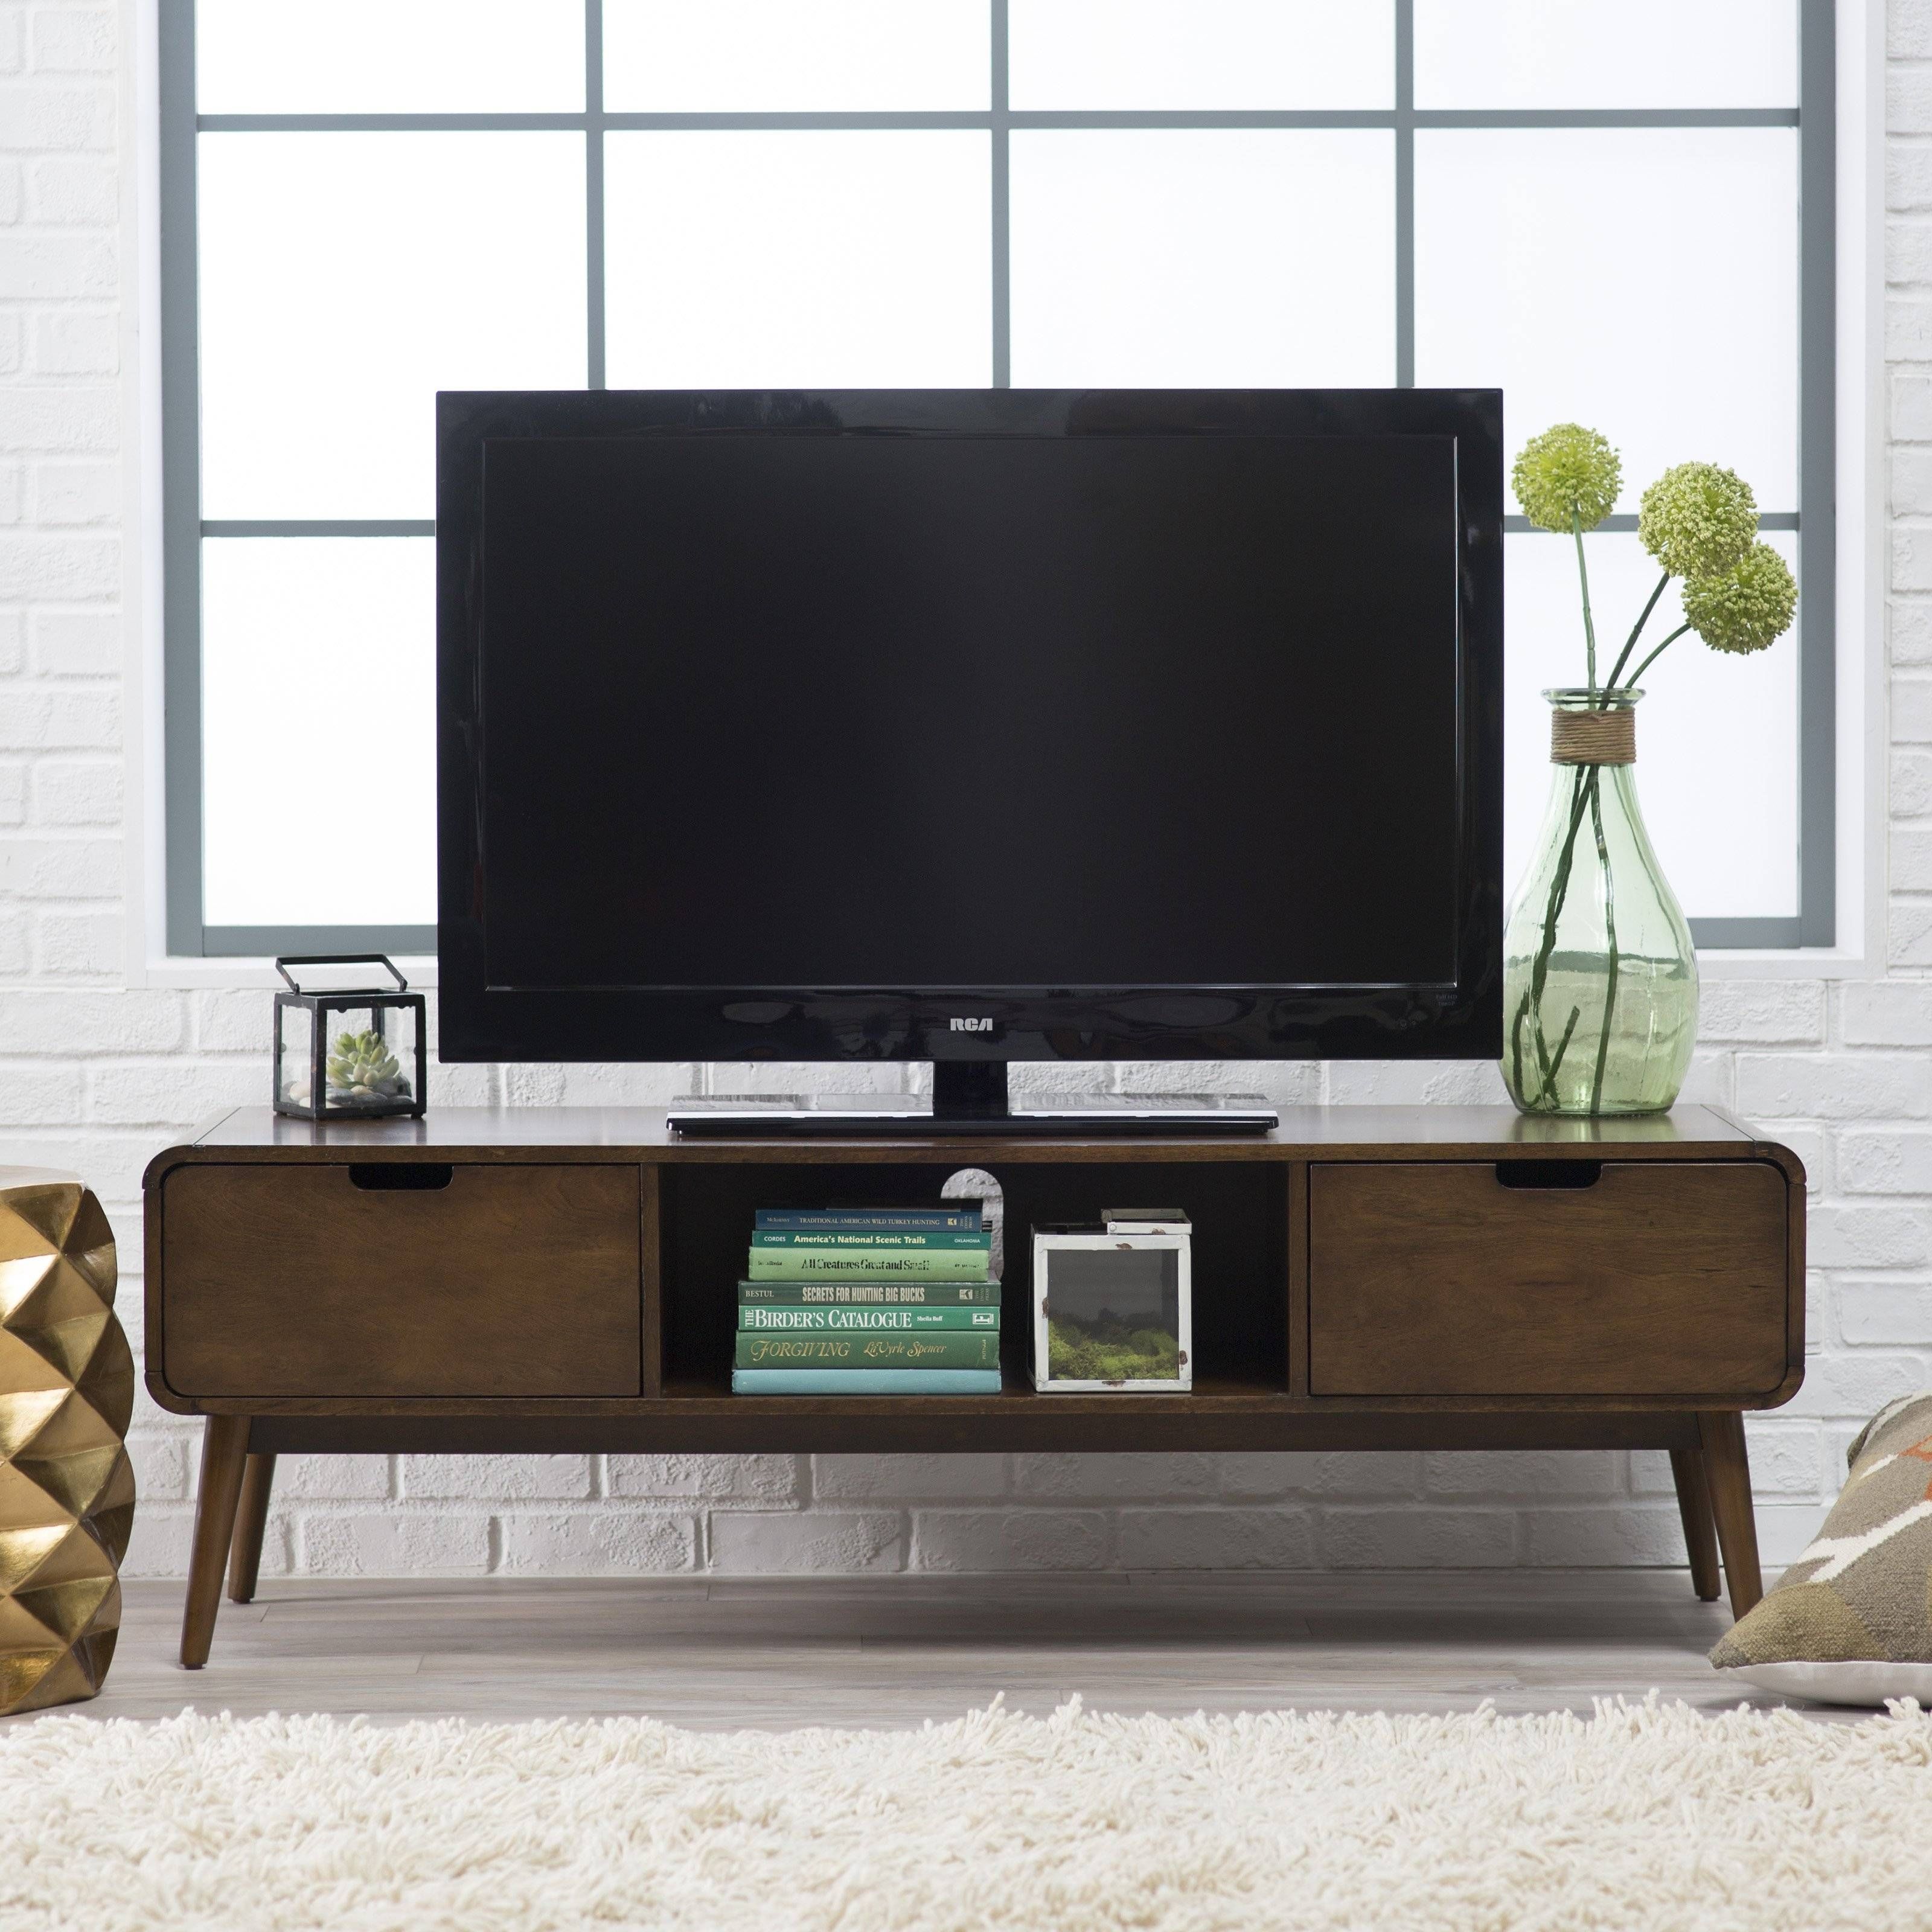 Belham Living Carter Mid Century Modern Tv Stand | Hayneedle With Modern Tv Stands (View 15 of 15)